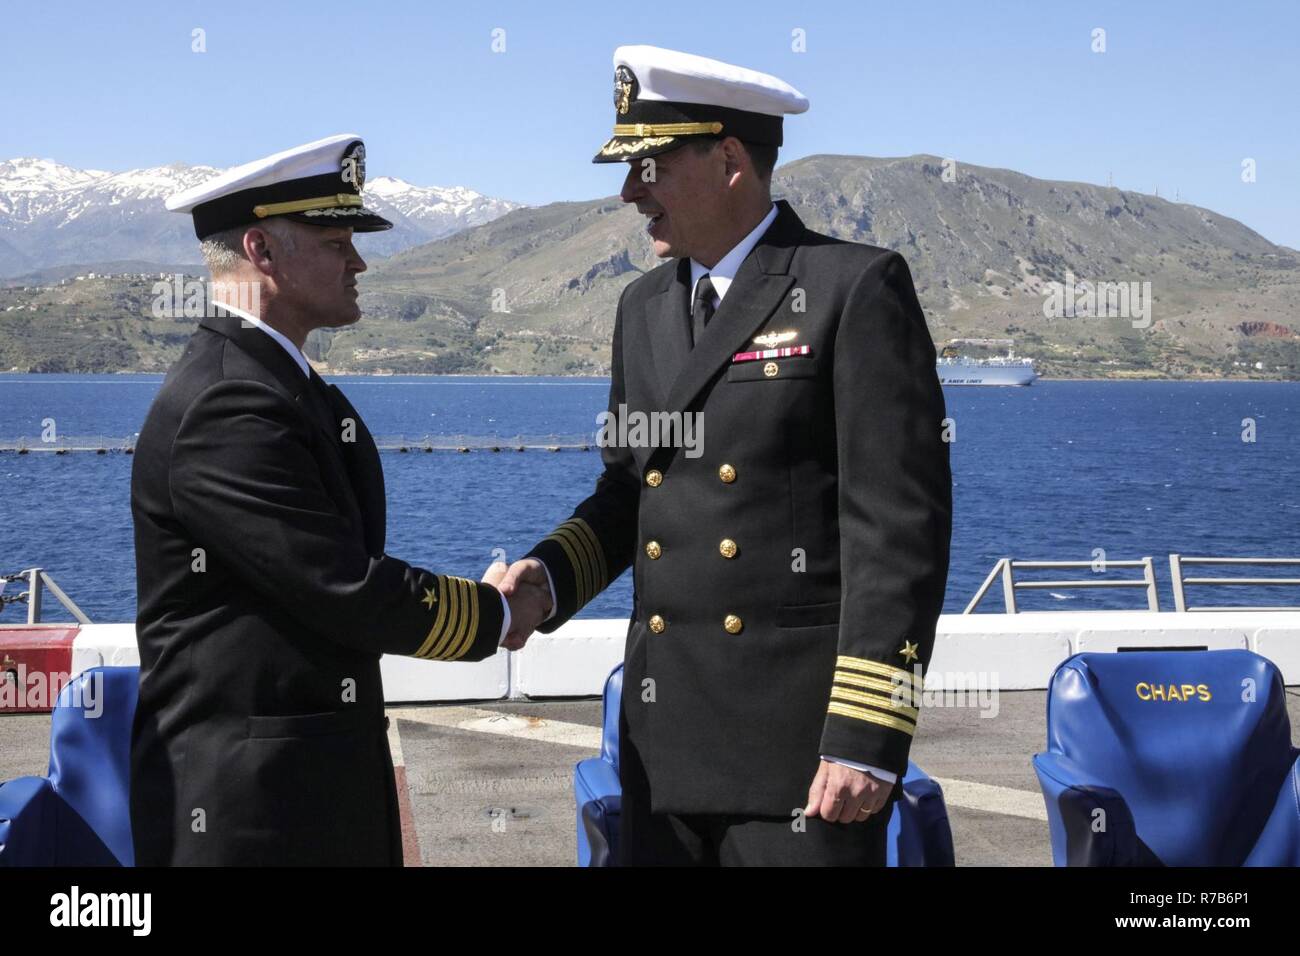 SOUDA BAY, Greece (May 5, 2017) Capt. Randall Peck , left, congratulates Capt. Maximilian Clark after being relieved as commanding officer of the San Antonio-class amphibious transport dock ship USS Mesa Verde's (LPD 19) during a change of command ceremony May 5, 2017. The ship is deployed with the Bataan Amphibious Ready Group to support maritime security operations and theater security cooperation efforts in the U.S. 6th Fleet area of operations. Stock Photo